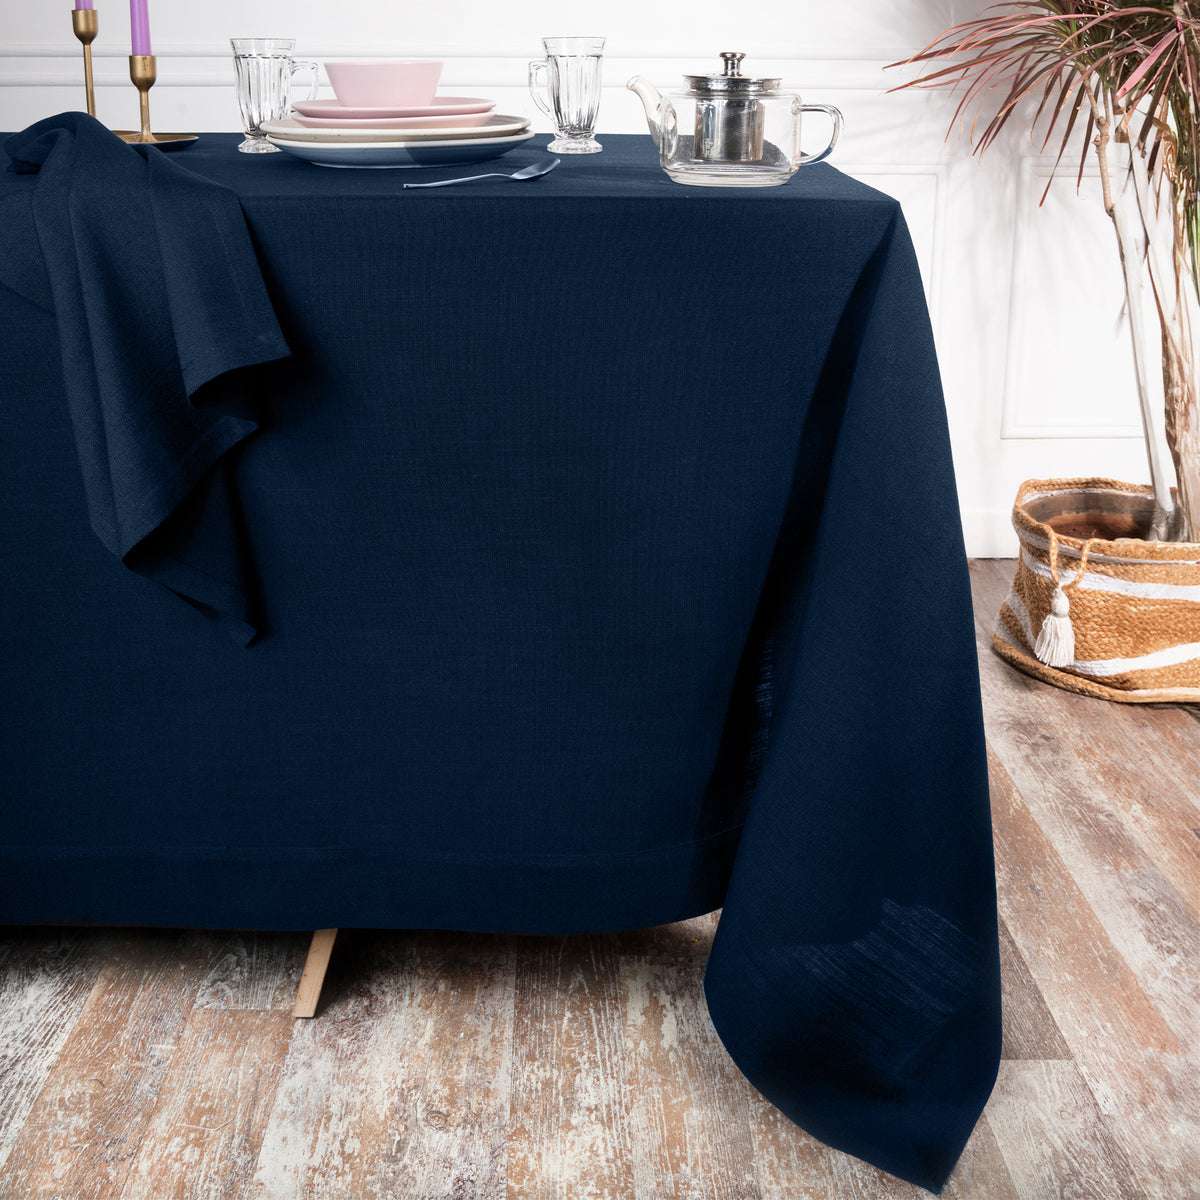 Navy Blue Faux Linen Tablecloth - Mitered Corner